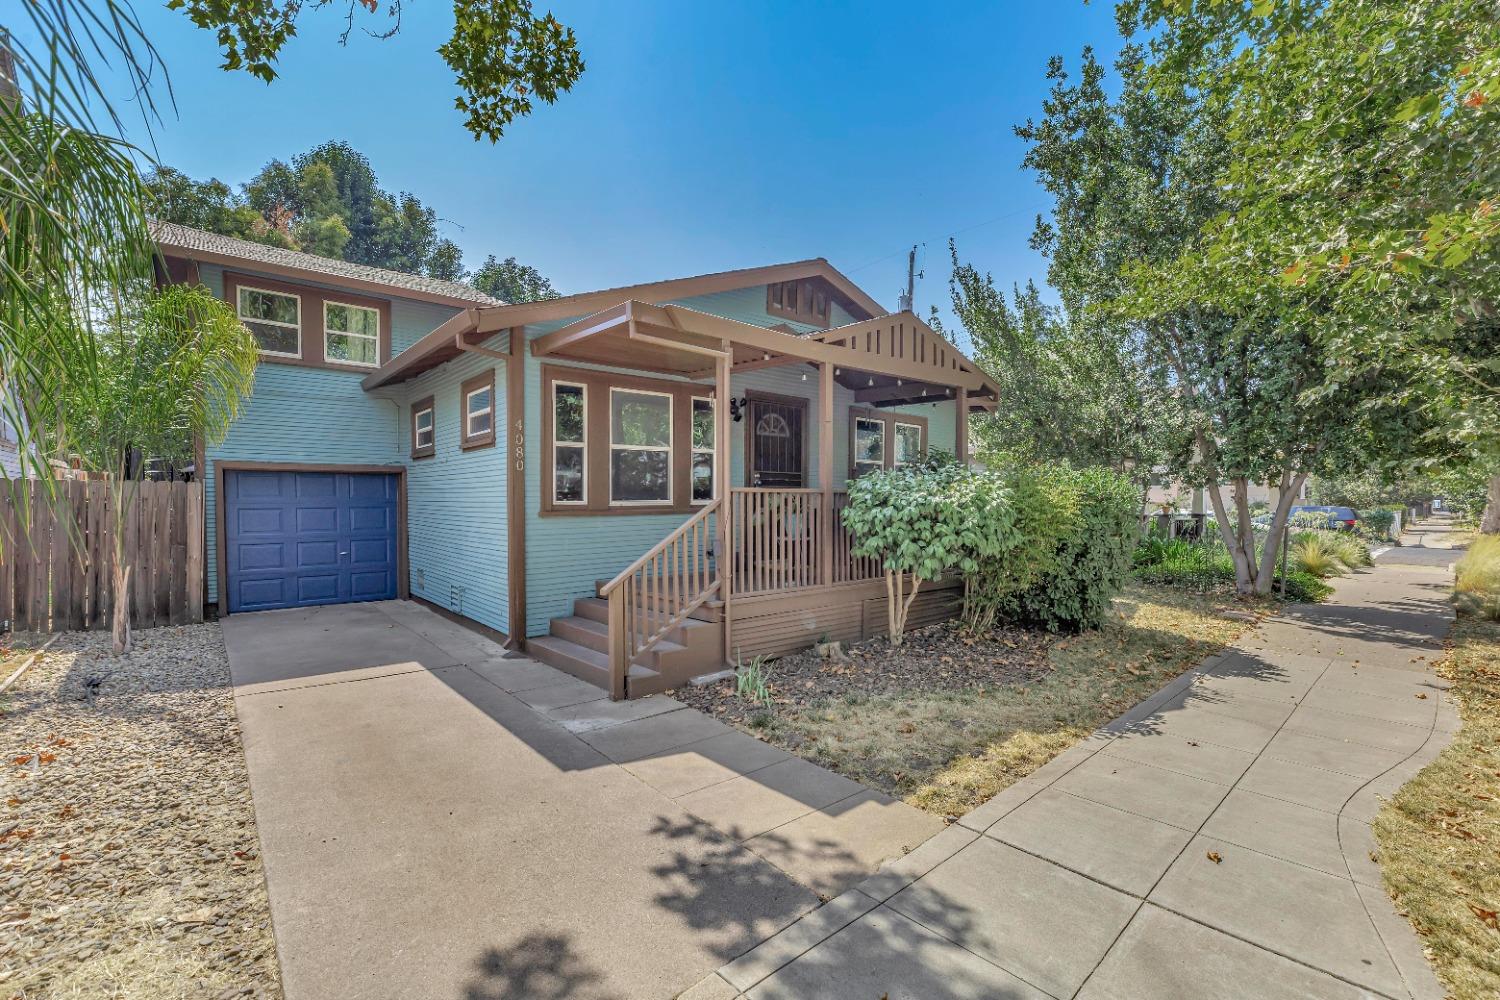 Stylish and cozy Craftsman bungalow home with treehouse LOFT primary bedroom in the exciting North O